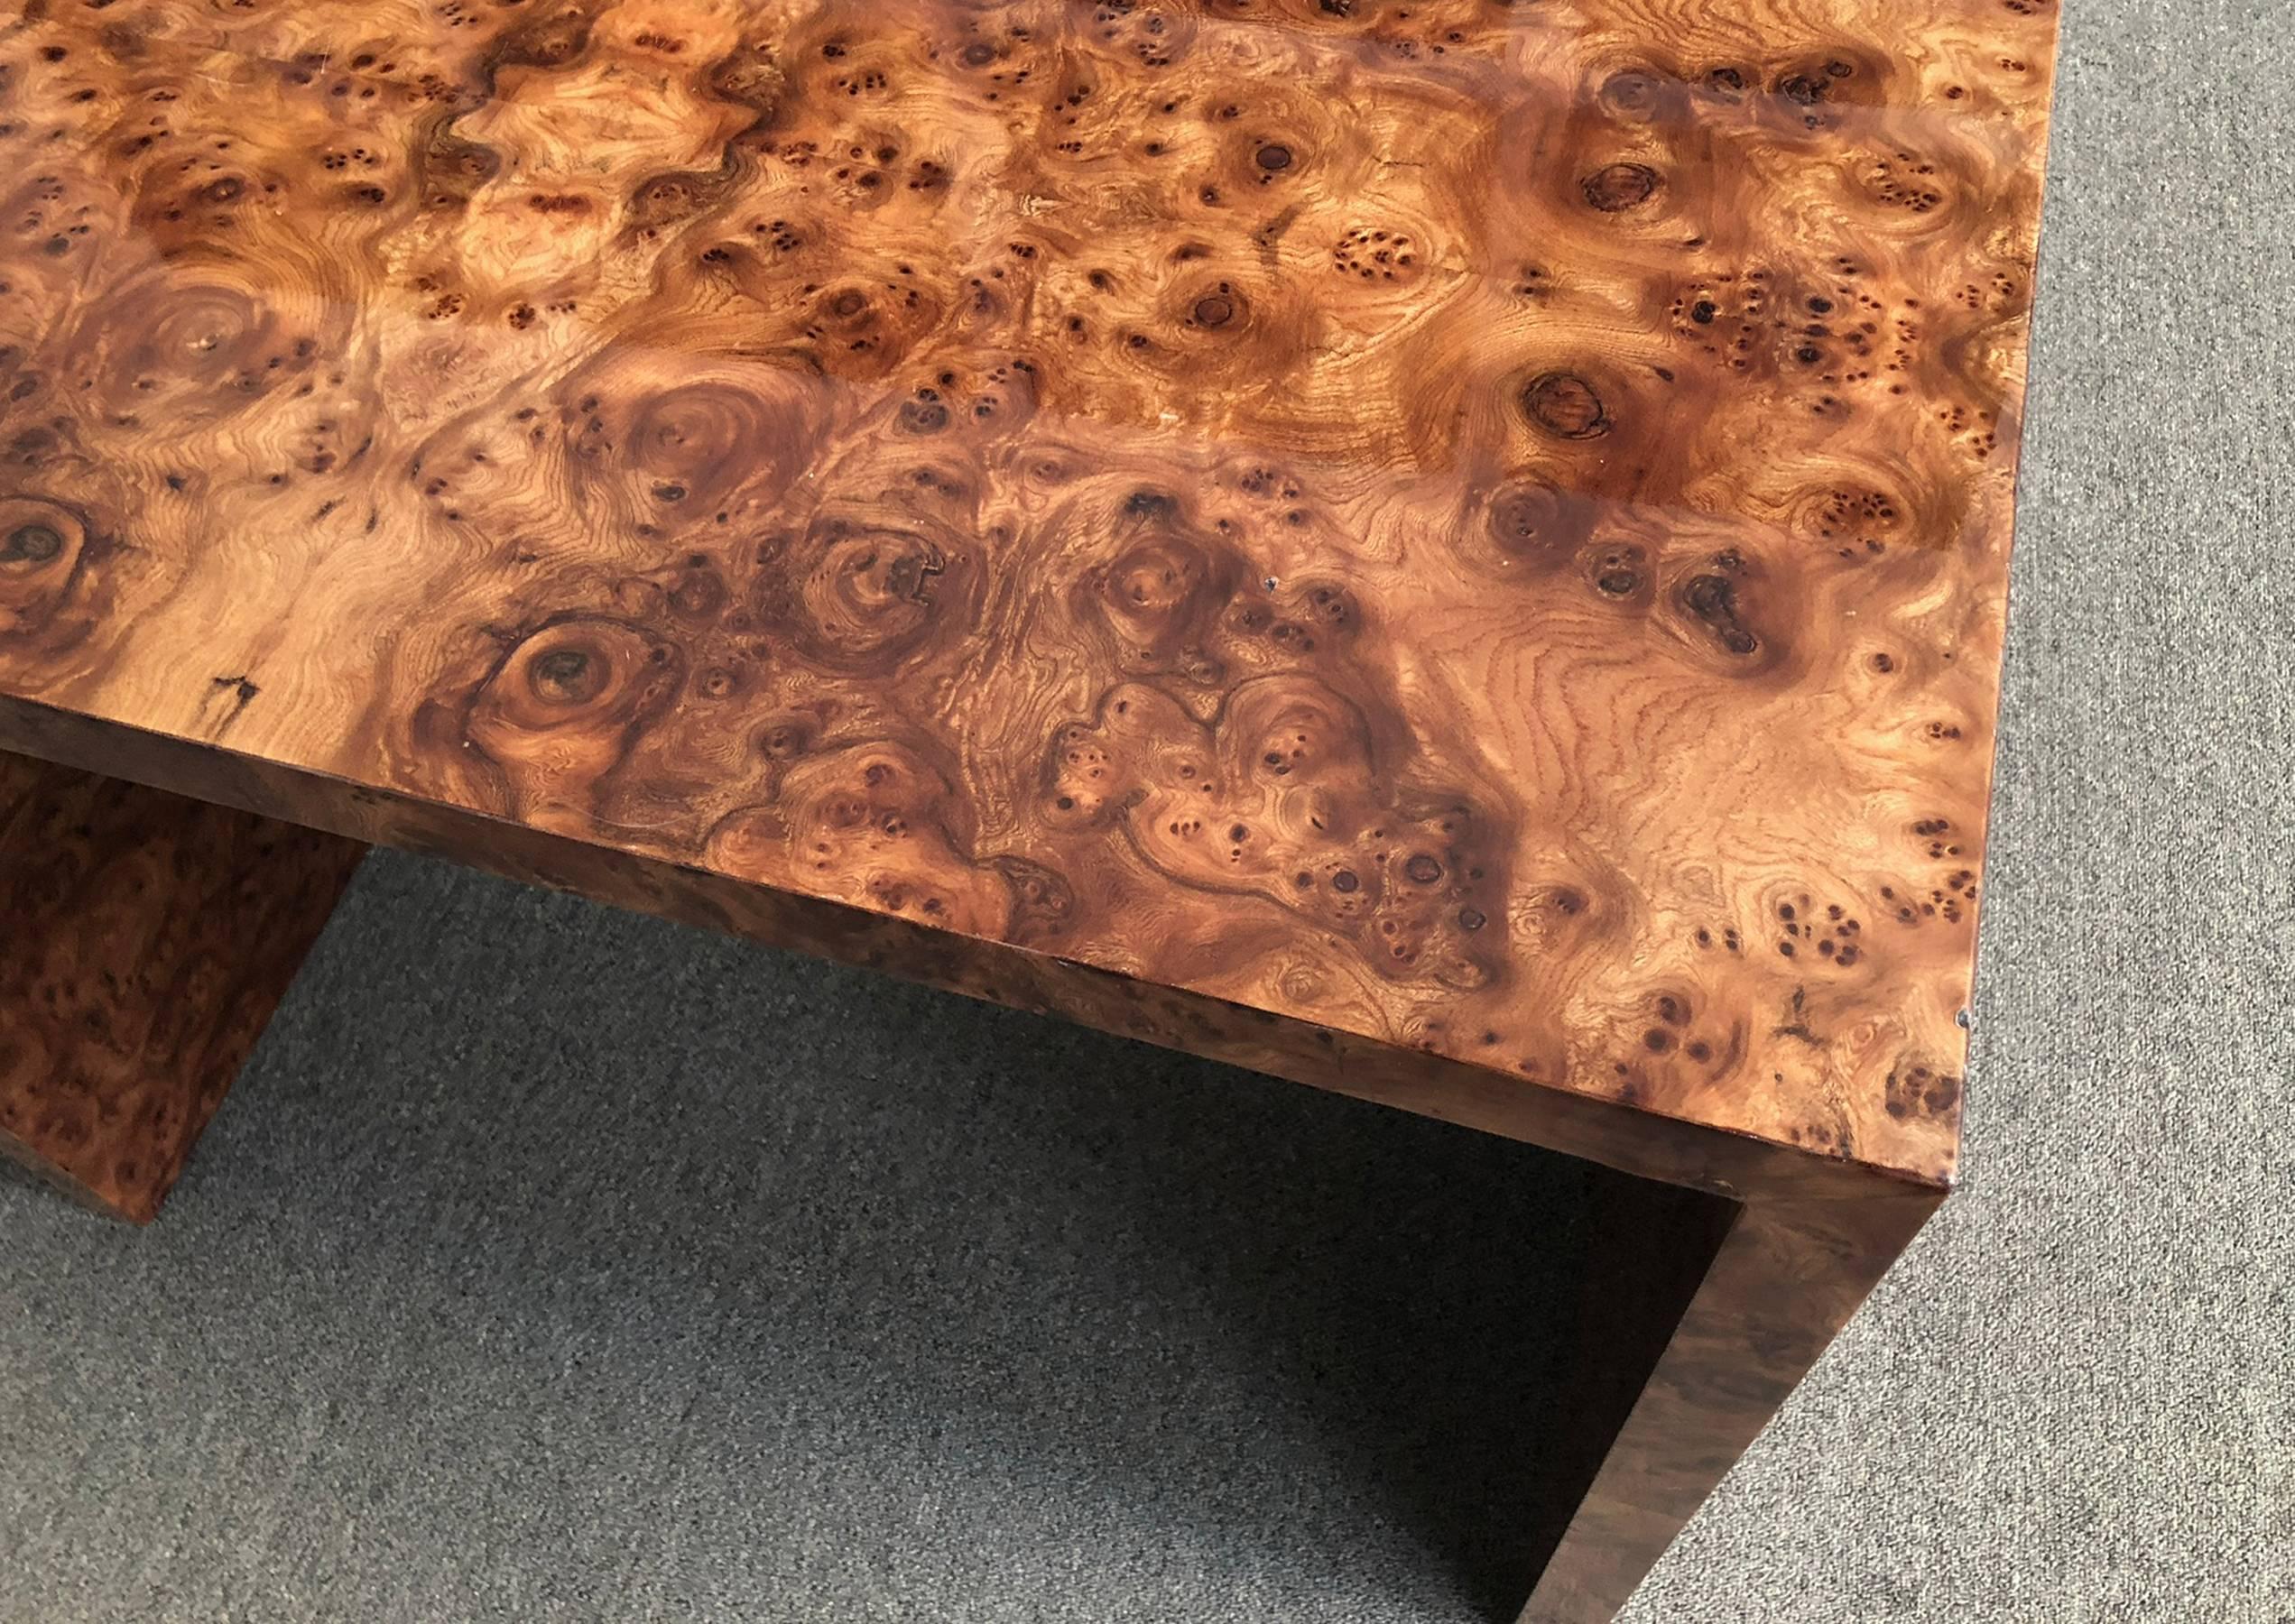 Pace collection desk or console table designed by Leon Rosen. Beautiful walnut burl wood with a durable finish.